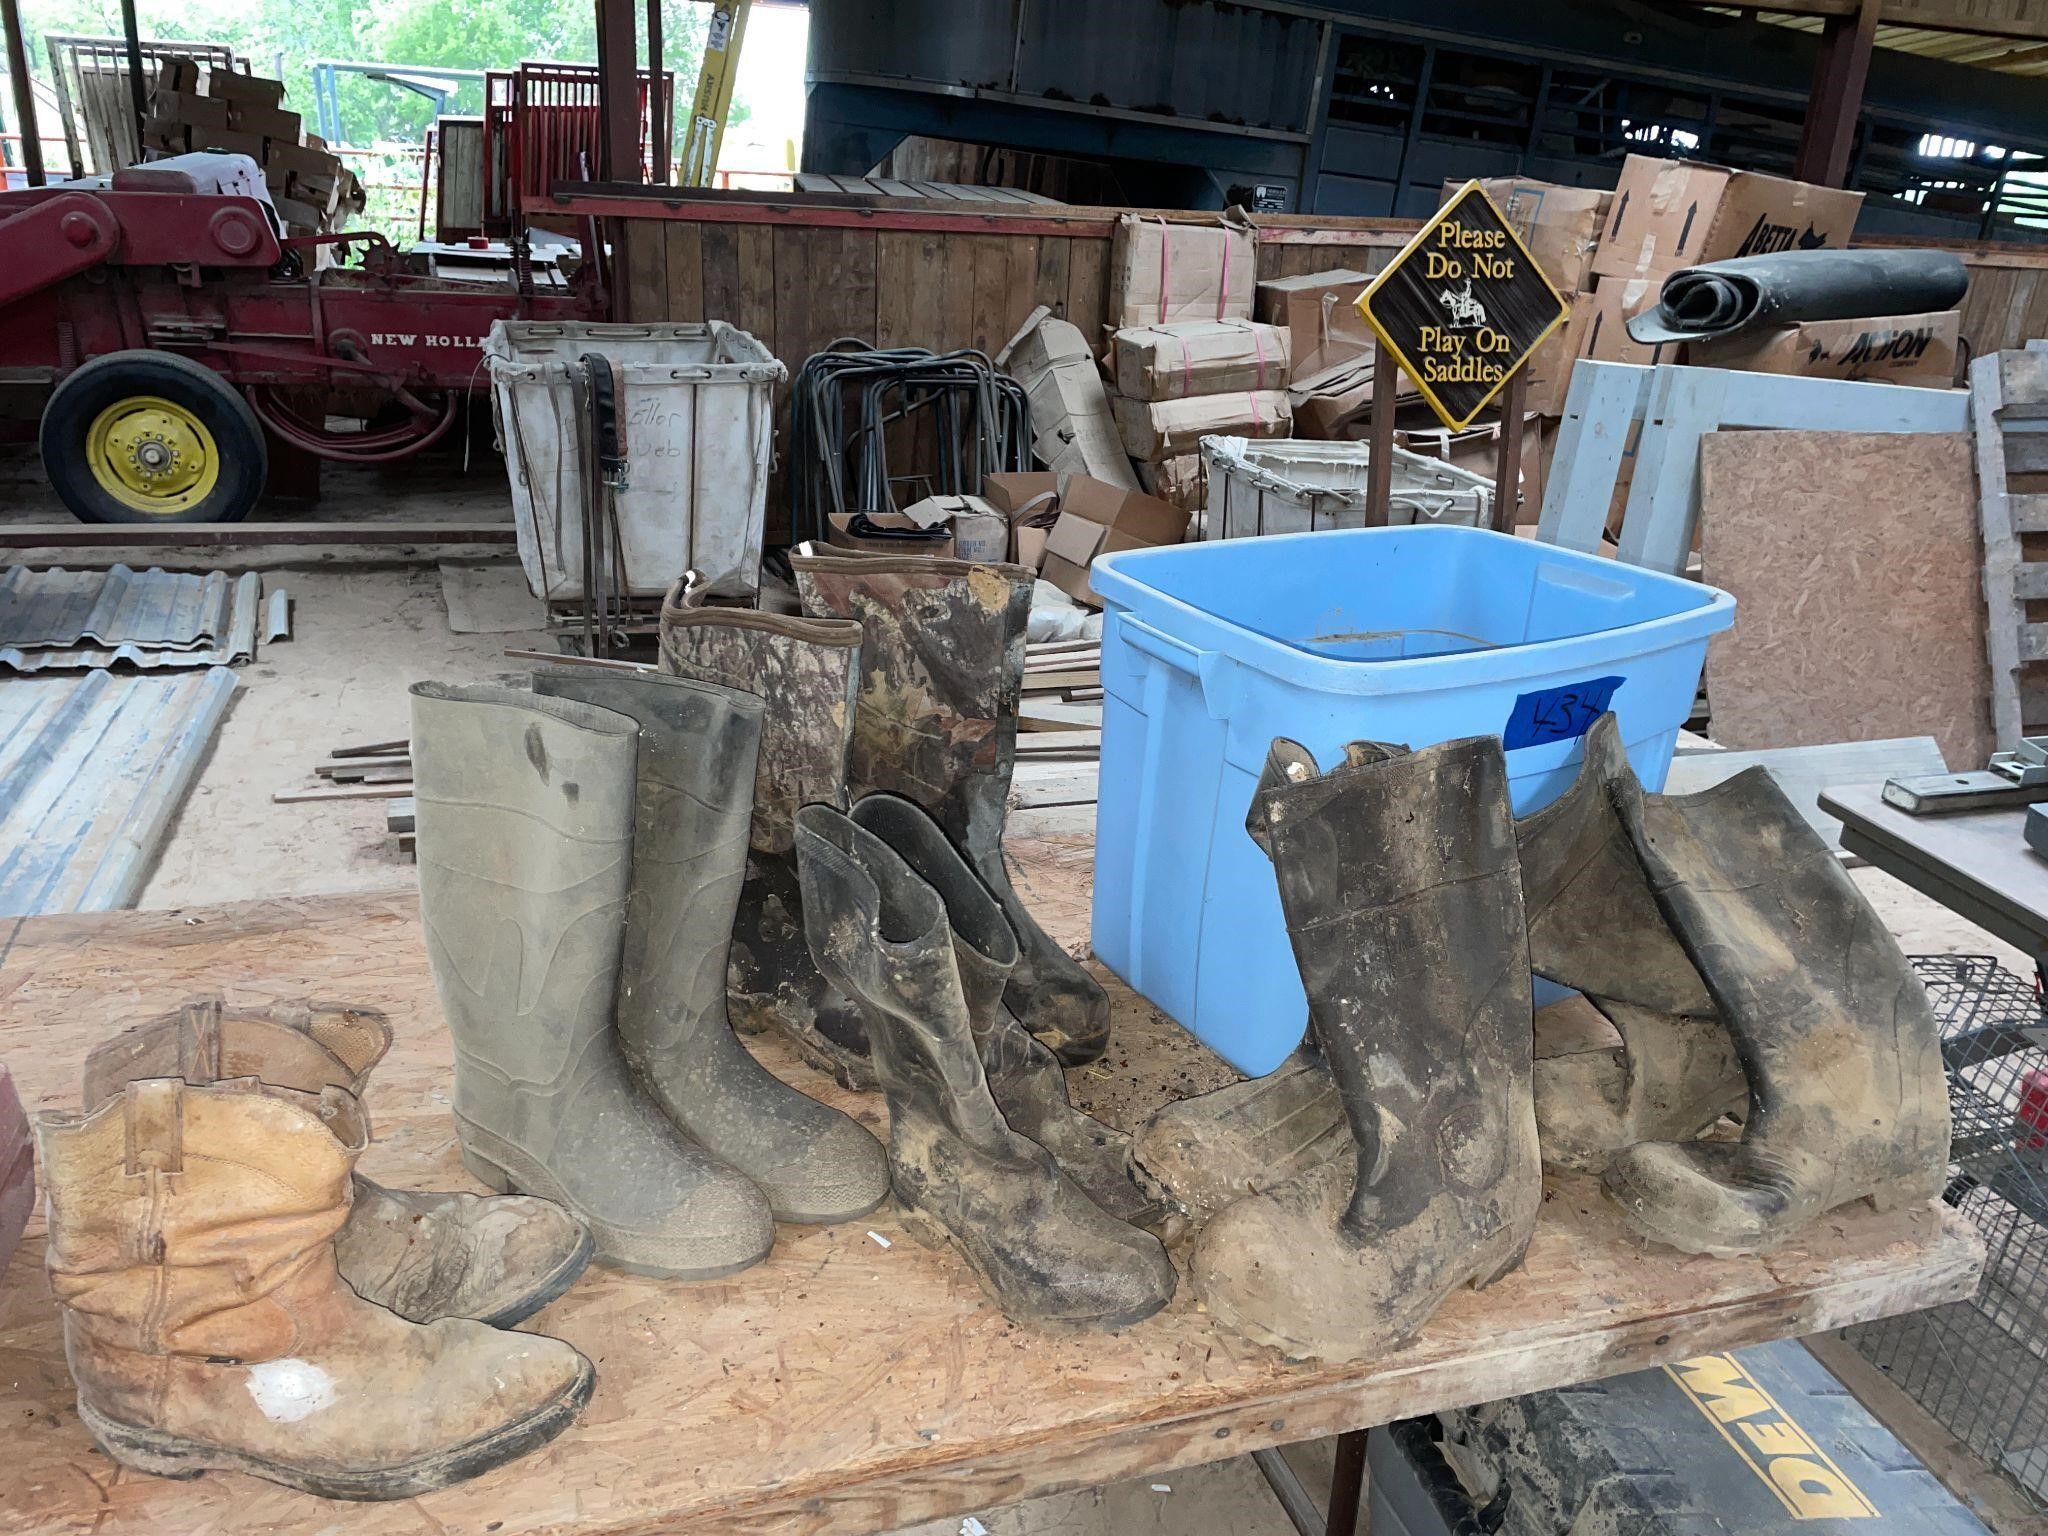 Tub of Rubber Boots (1 pair is Muck brand)